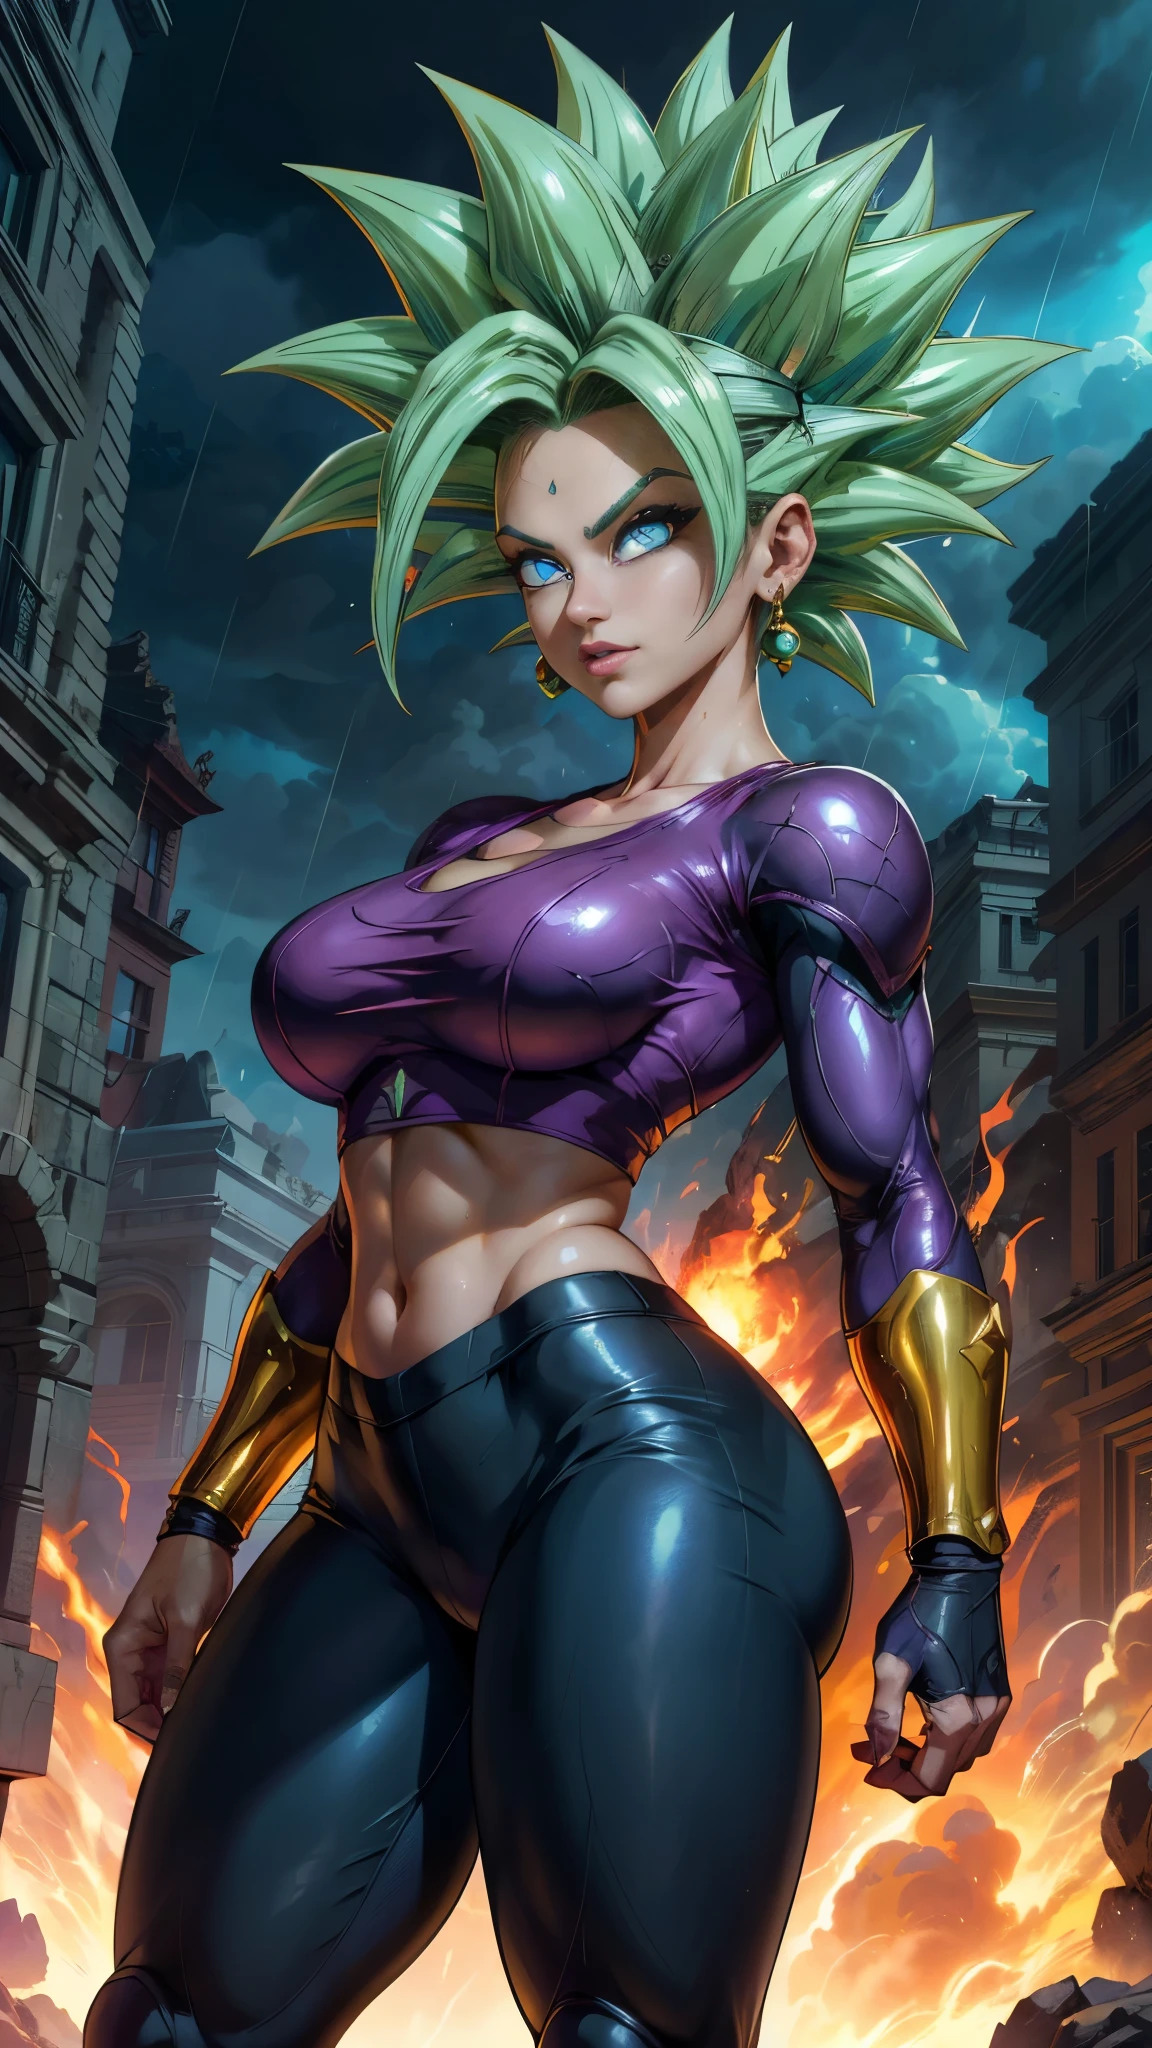  (La Best Quality,A high resolution,Ultra - detailed,actual),Kefla [Dragon Ball Super),(full green hair :1.4) , black crop top, (shiny white tights/shackles:1.4),,(Cyberpunk ruined dungeon ruins background :1.4 ), More detailed 8K.unreal engine:1.4,UHD,La Best Quality:1.4, photorealistic:1.4, skin texture:1.4, Masterpiece:1.8,first work, Best Quality,object object], (detailed face features:1.3),(The correct proportions),(Beautiful blue eyes:1.4 ),  (dynamic cowboy pose), (Kefla Dragon Ball Super:1.4), (perfect anatomy :1.4),( cinematic lighting :1.4), (Kefla Dragon Ball Super V2.1),( background thunder falling rain water cloudy :1.4), (Face details: 1.5, bright blue eyes, beautiful face, pretty eyes, Iris contour, thin lips: 1.5, Thin, sharp pale eyebrows, Long, dark eyelashes, double tabs),